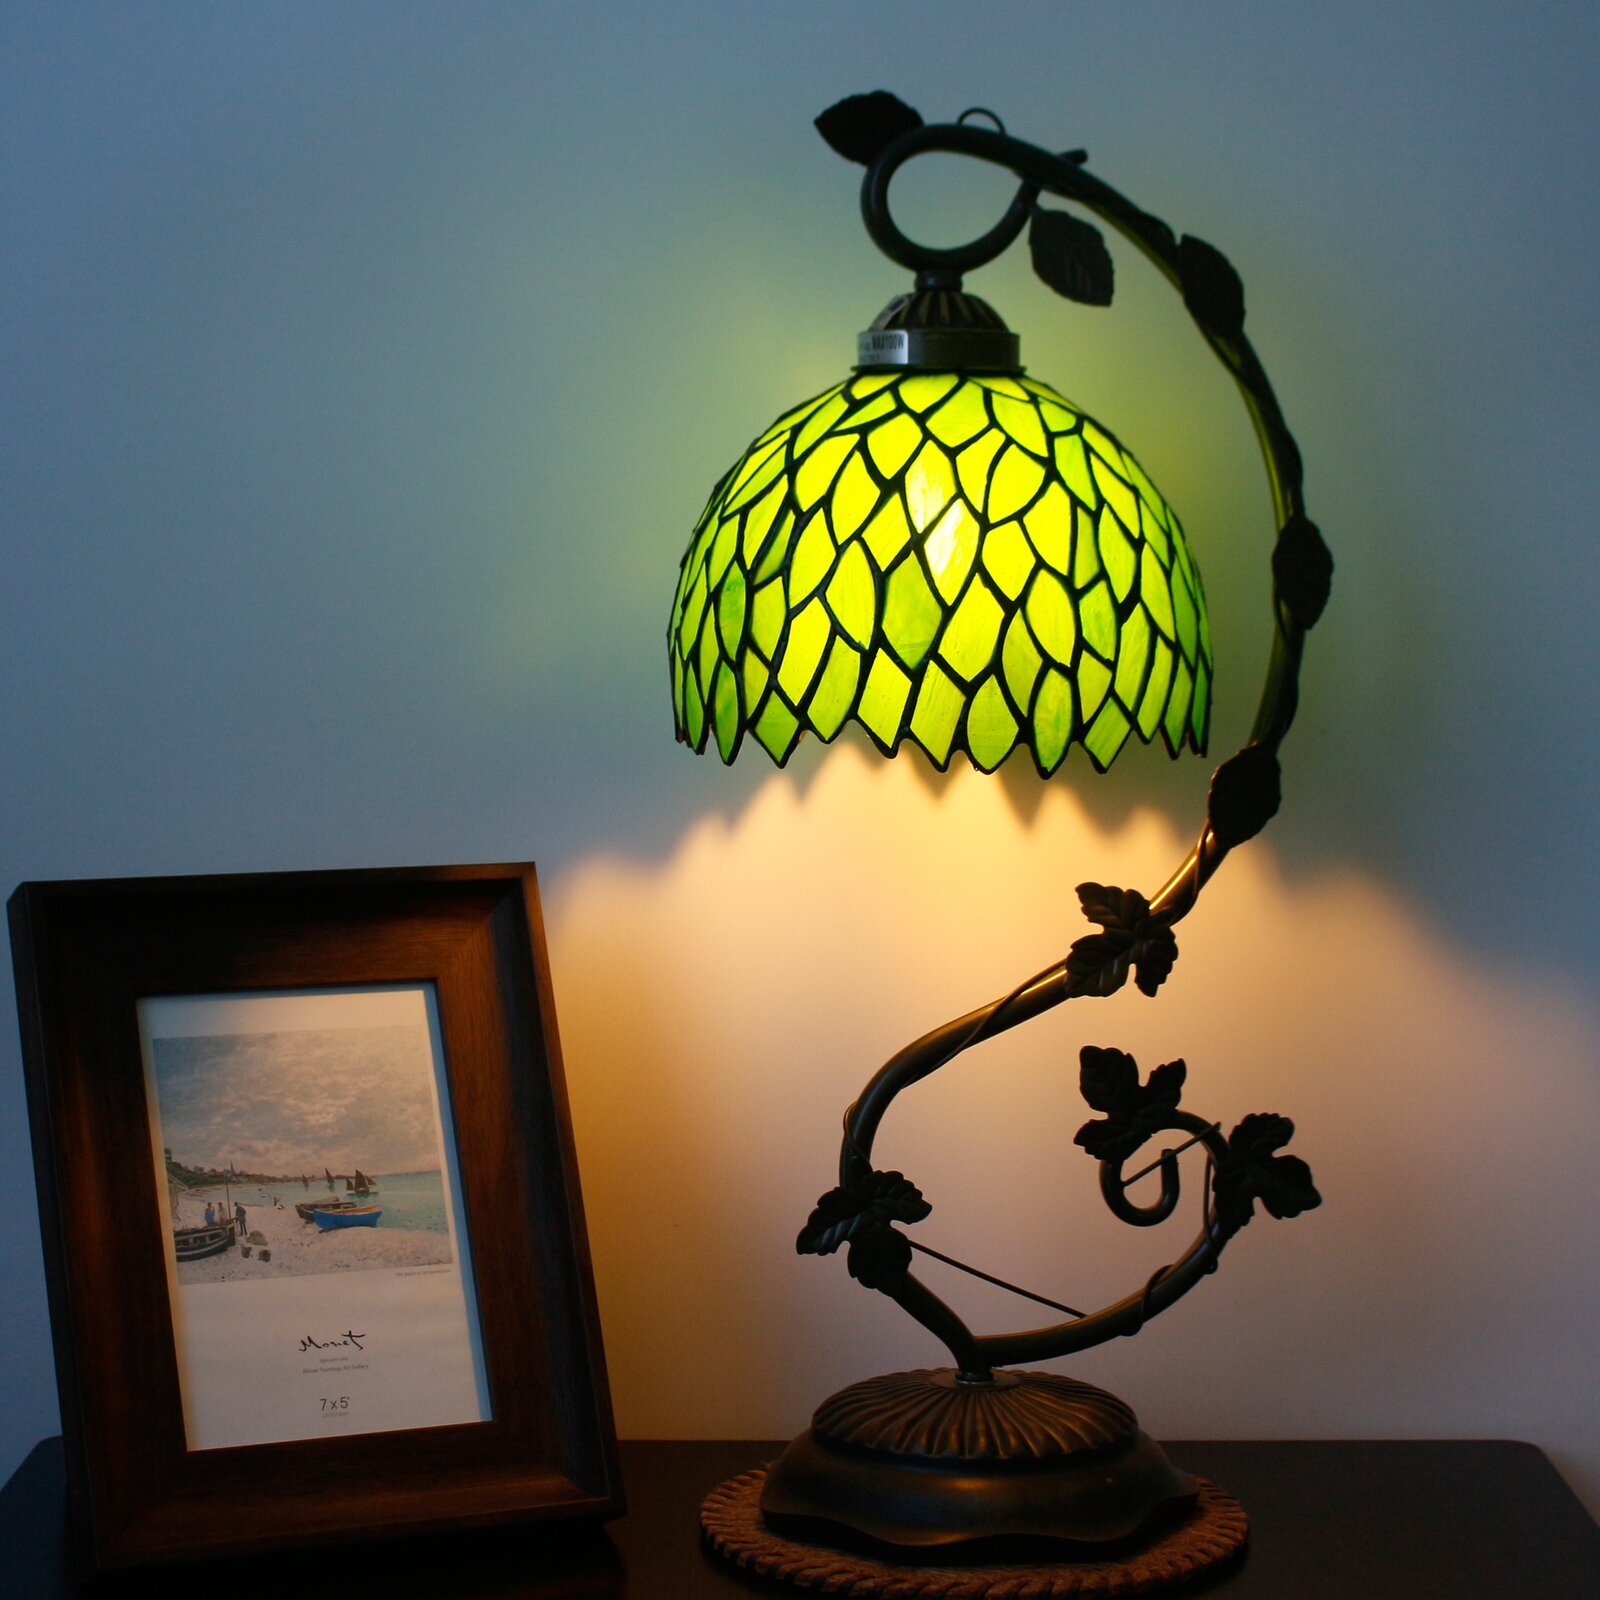 Tiffany Lamp Stained Glass Table Reading Banker Night Light Green Wisteria Style W8H20 Inch S523 World Menagerie LAMPS Living Room Bedroom Office Study Coffee Bar Dresser Bookcase Desk Bedside Crafts Gift